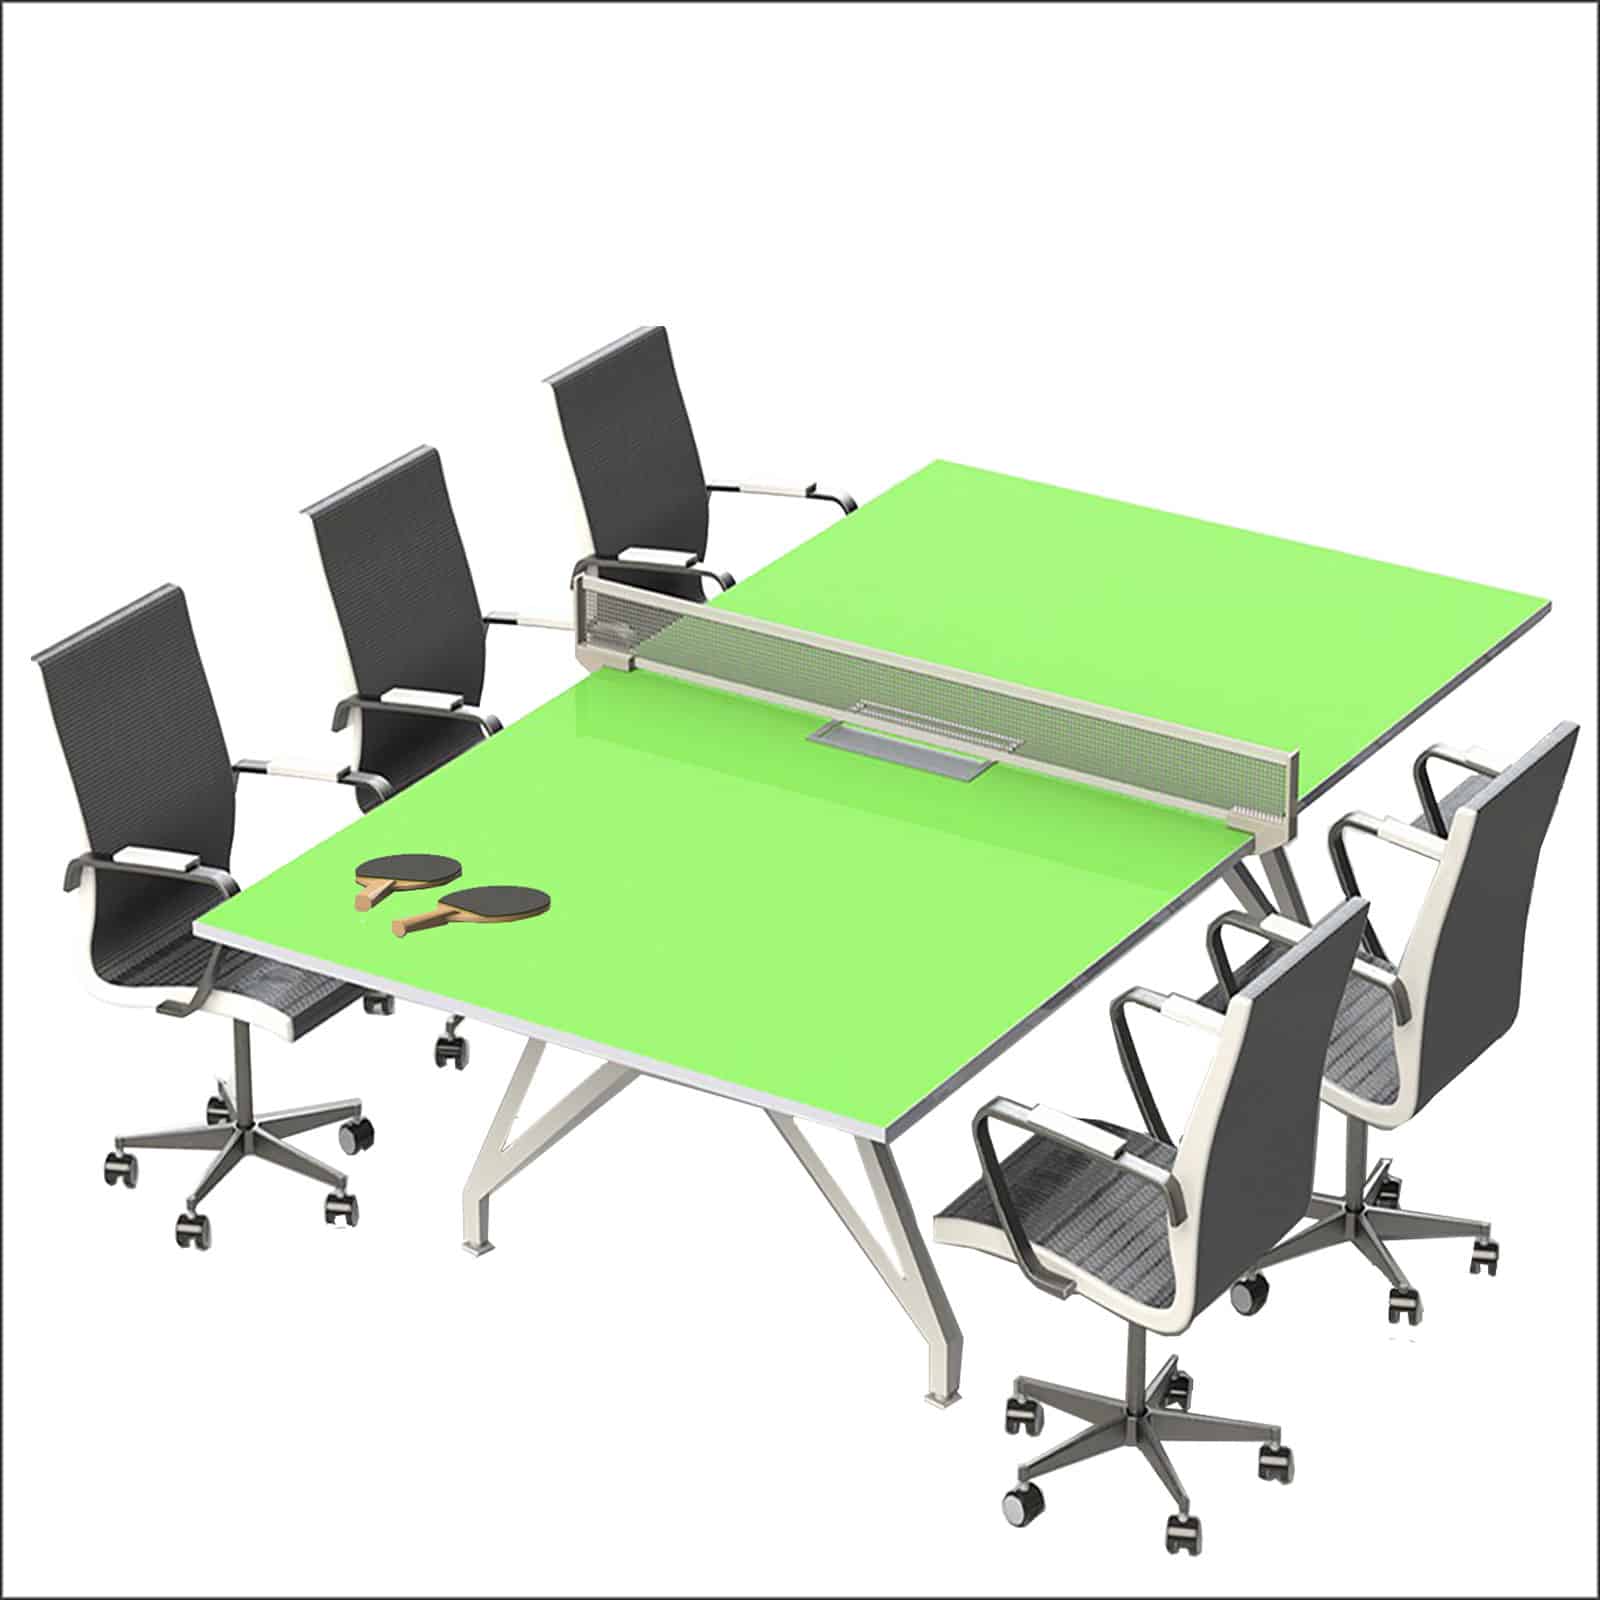 The Scale 1:1 EYHOV Sport Conference Table